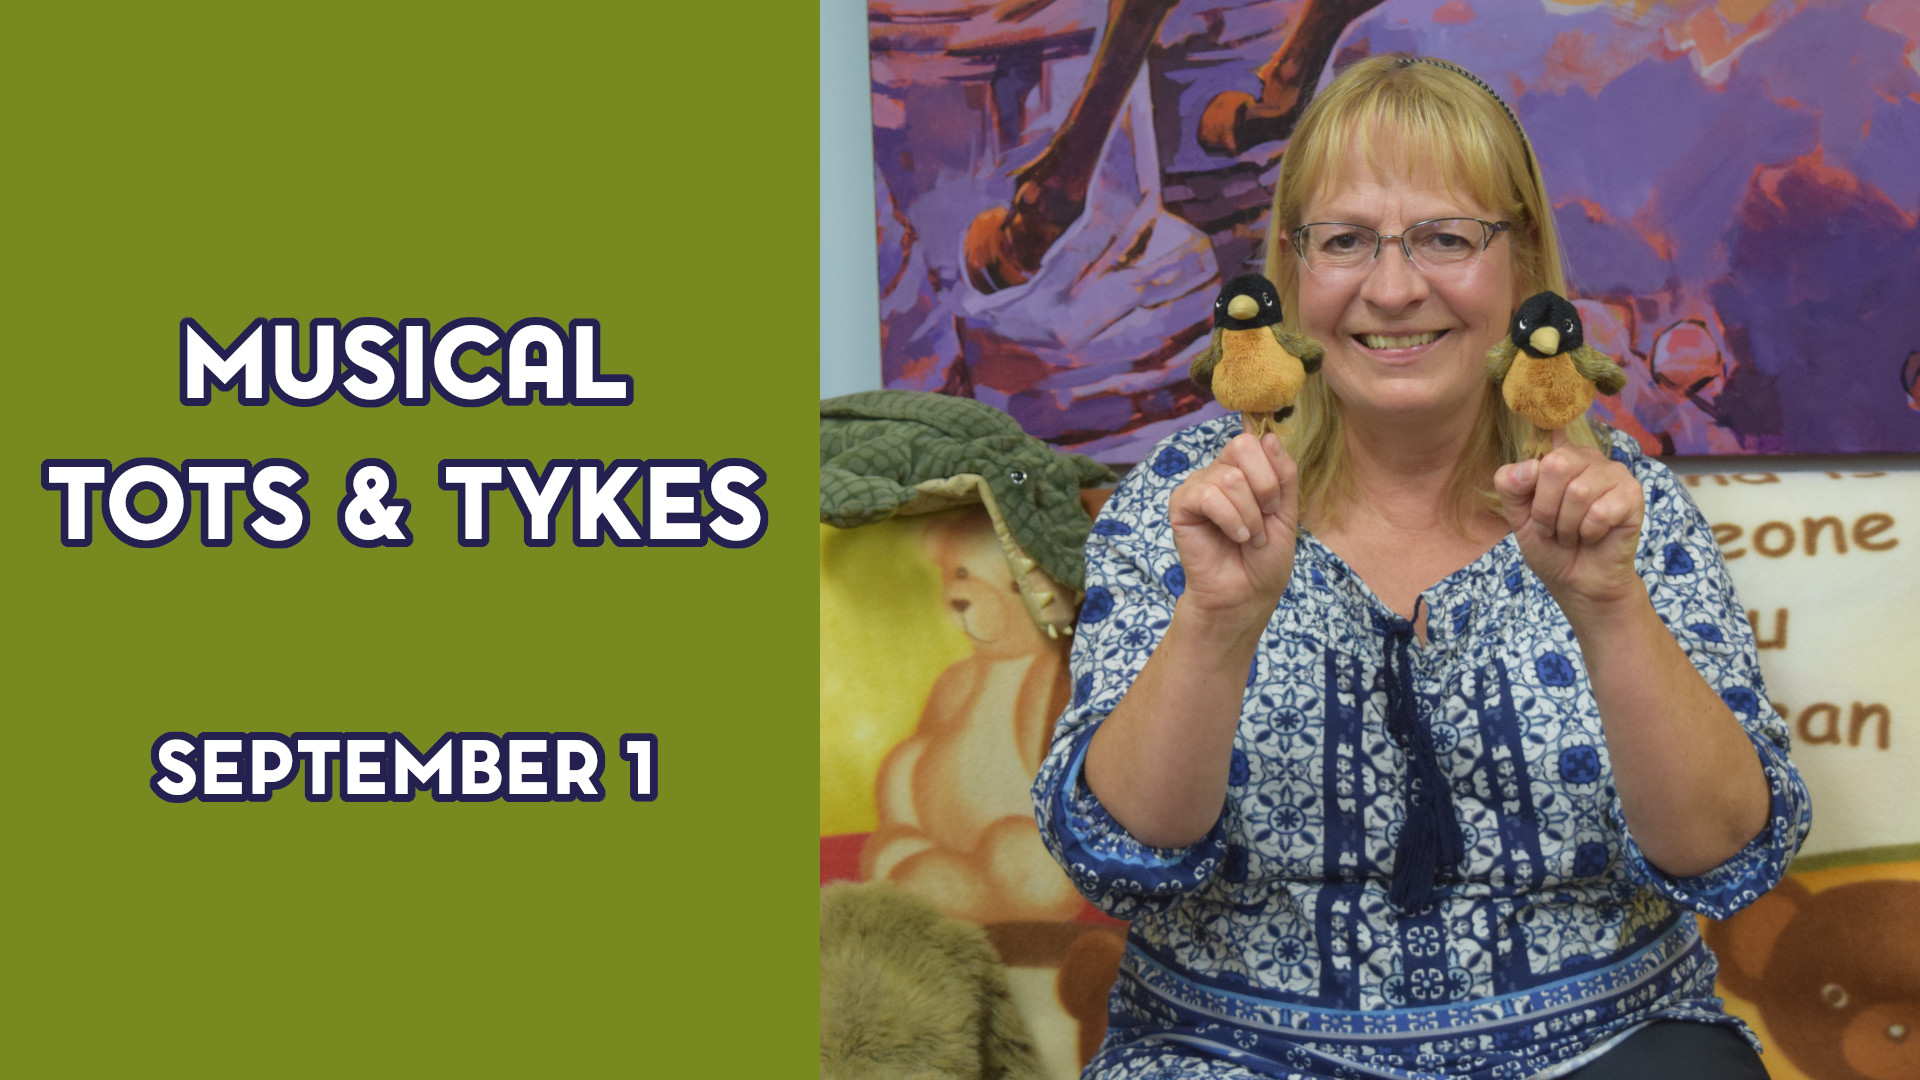 A woman holds two stuffed birds next to the text "Musical Tots & Tykes September 1"